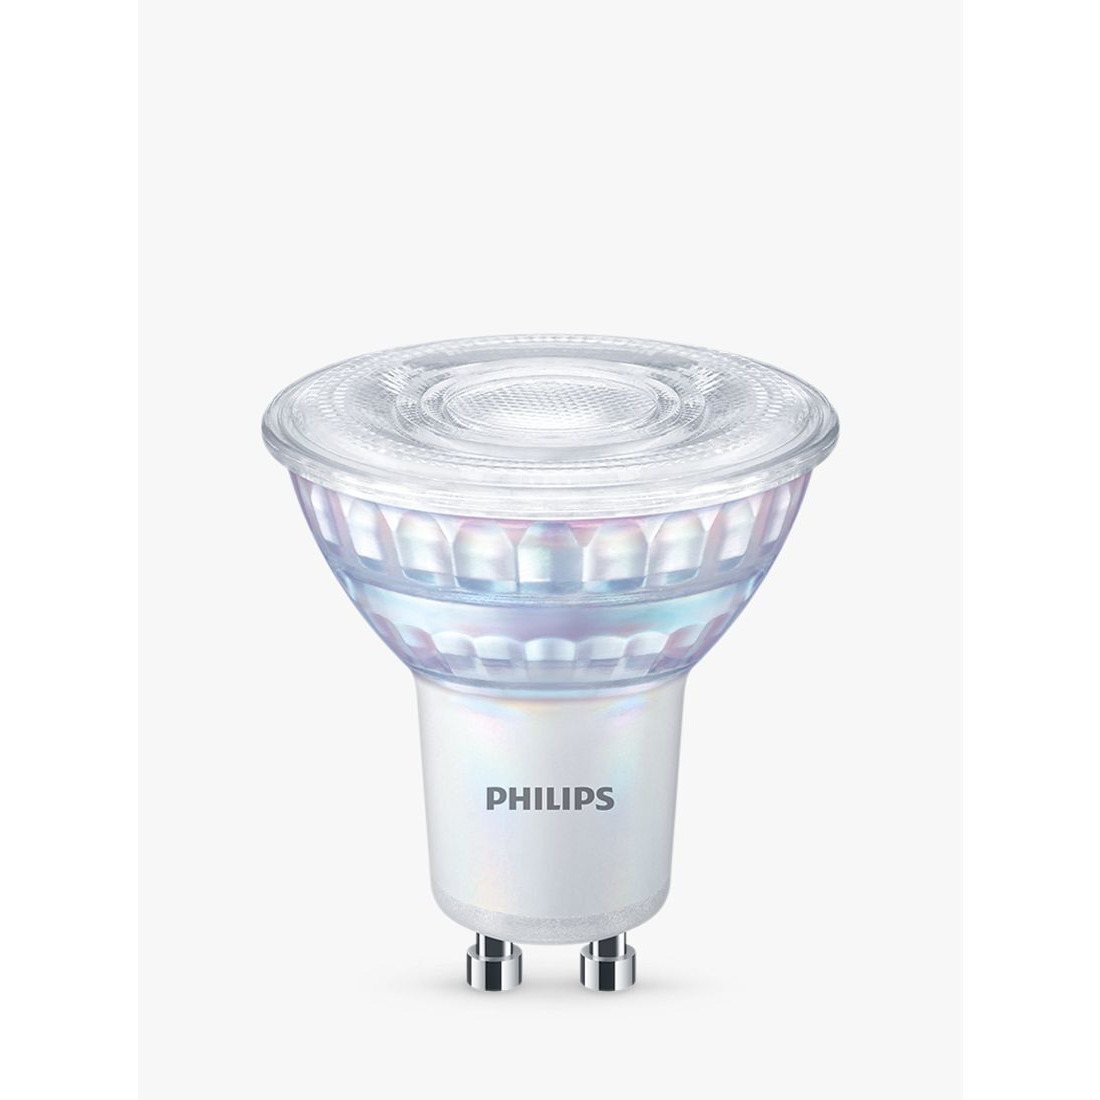 Philips 4W GU10 LED Dimmable Spotlight Bulb, Warm White, Pack of 3 - image 1